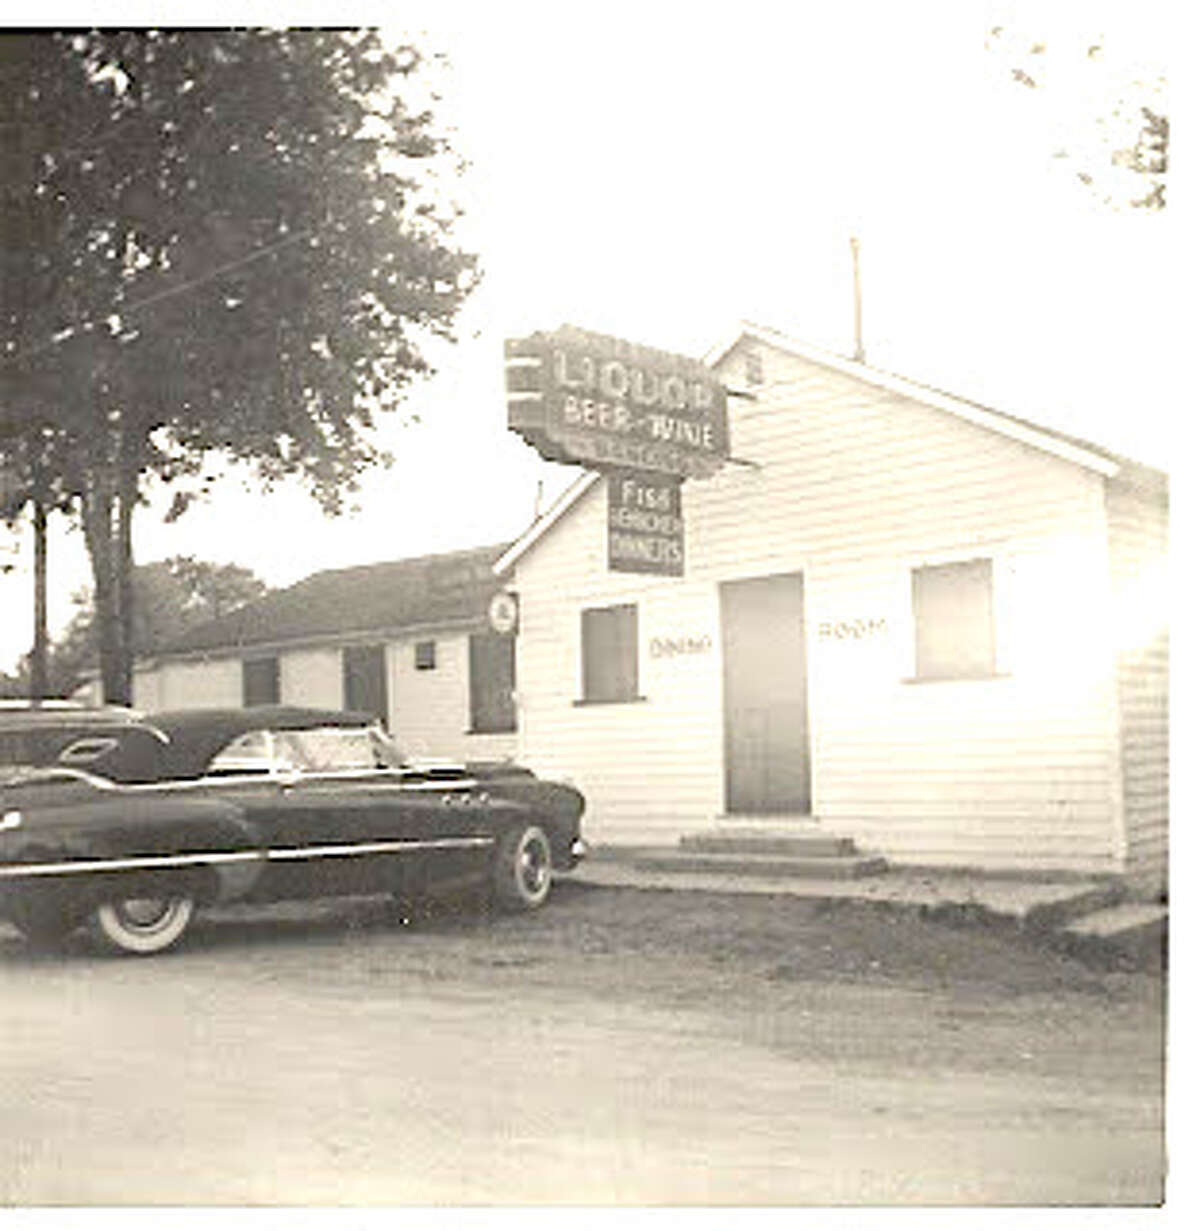 The Silver Dollar Tavern in Bay Port was the hot spot for dances back in the day before it burned down. Jerri Glaspie and other girls from Cass City would go to dances all over the Thumb years ago.